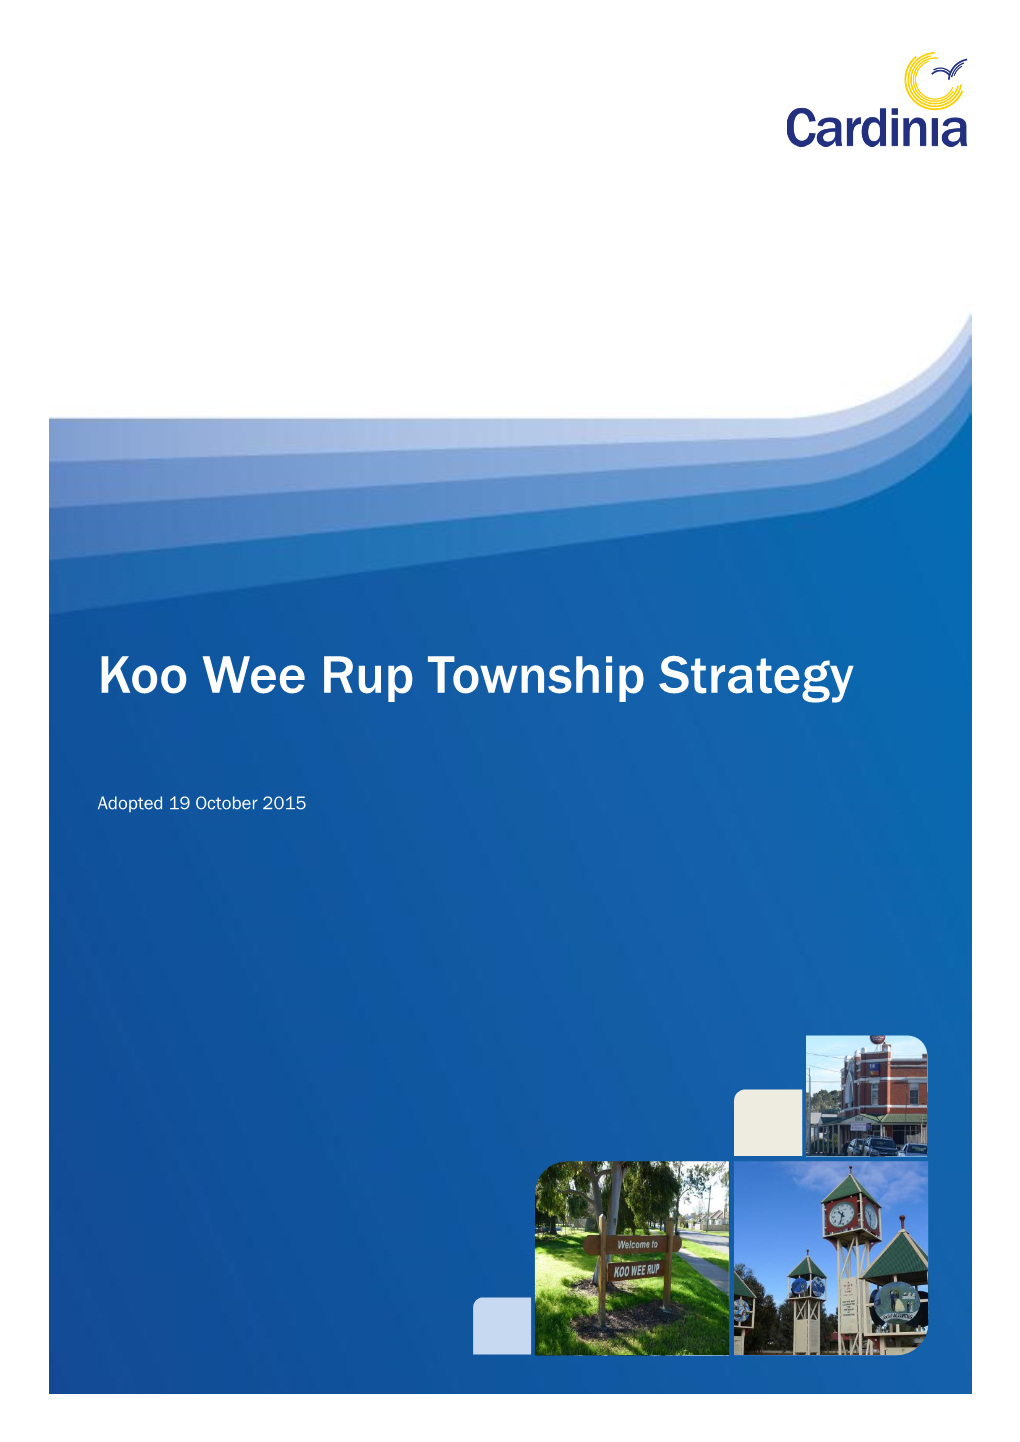 Koo Wee Rup Township Strategy